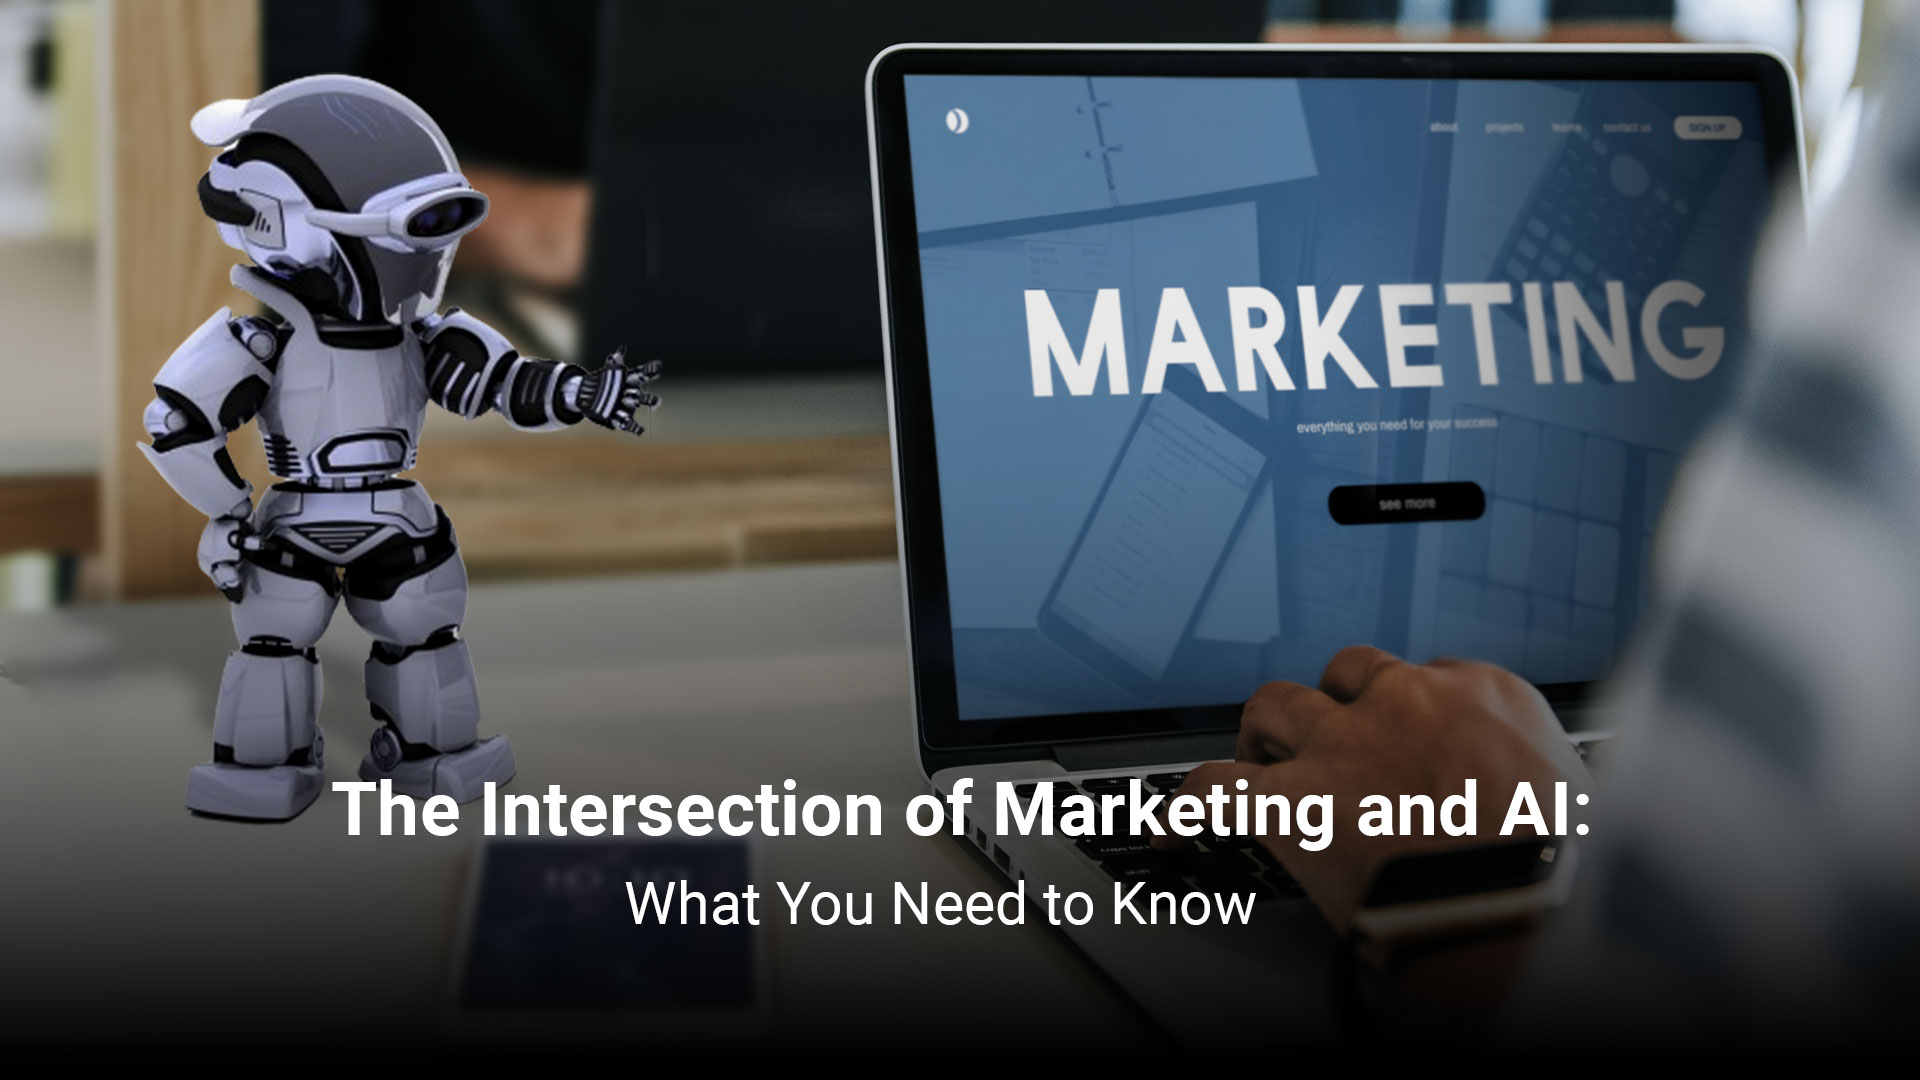  The Intersection of Marketing and AI: What You Need to Know   